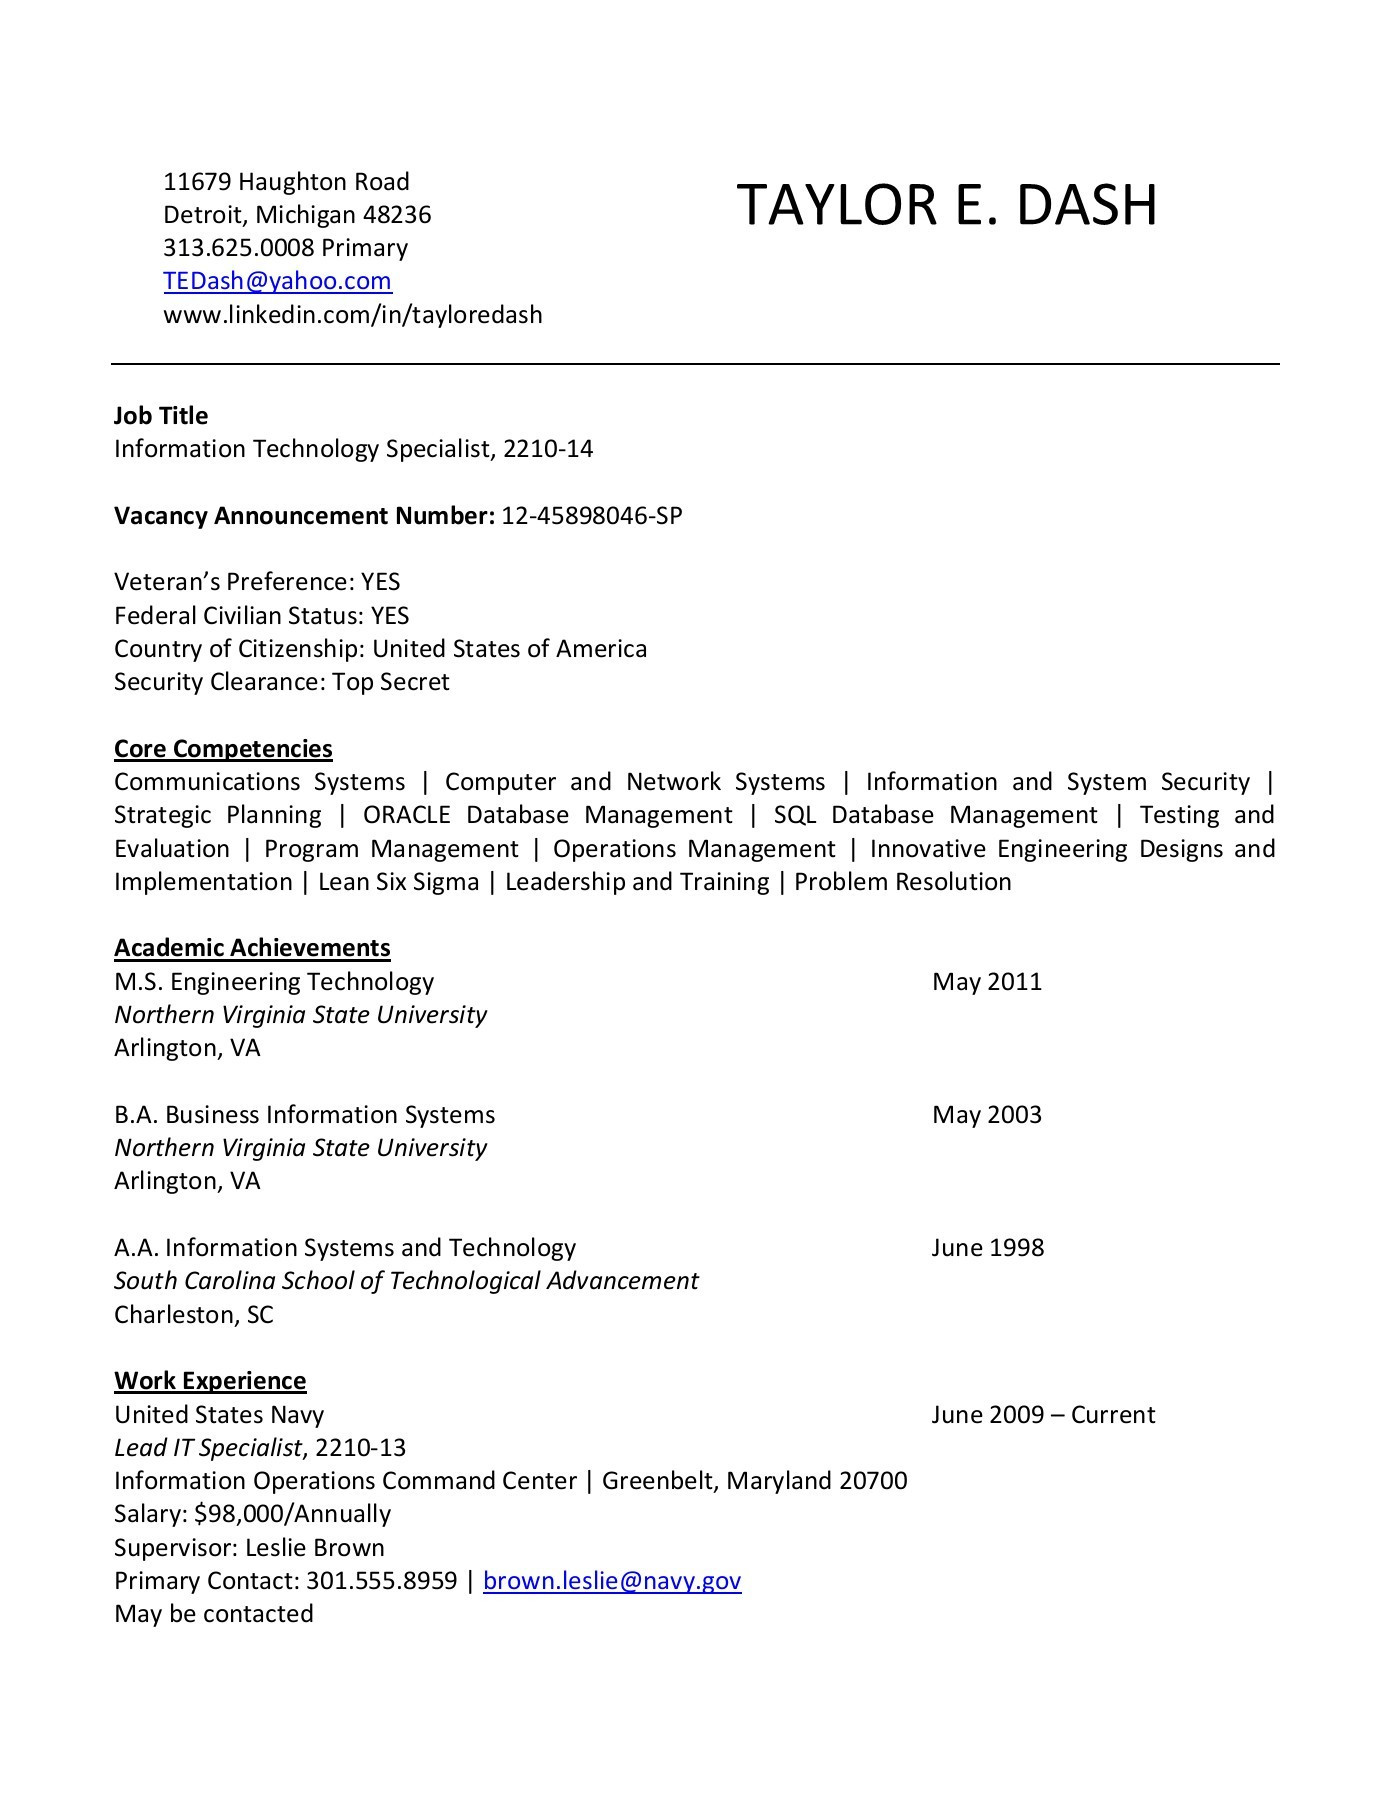 Sample Resume for Information Technology Specialist Resume Of An Information Technology Specialist – Flipbook by …